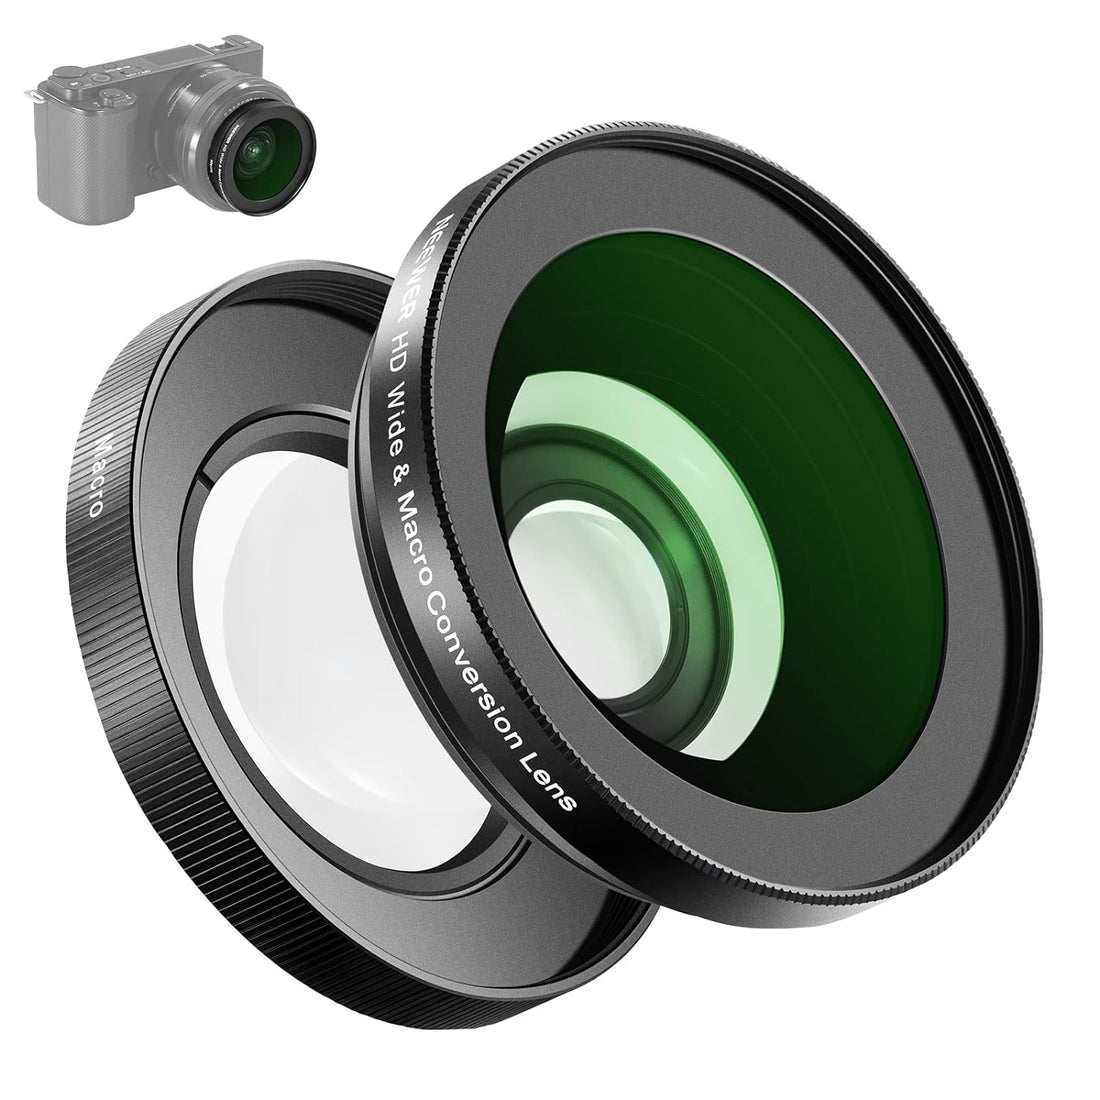 NEEWER 49mm 0.43X HD 2 in 1 Wide Angle & Macro Lens, Ultra Wide Angle Lens with 18mm Focal Length Compatible with Canon EOS Kiss M2 EOS RP EOS R10 Sony ZV-E10 A6400 A7 IV Nikon Z50, LS-20